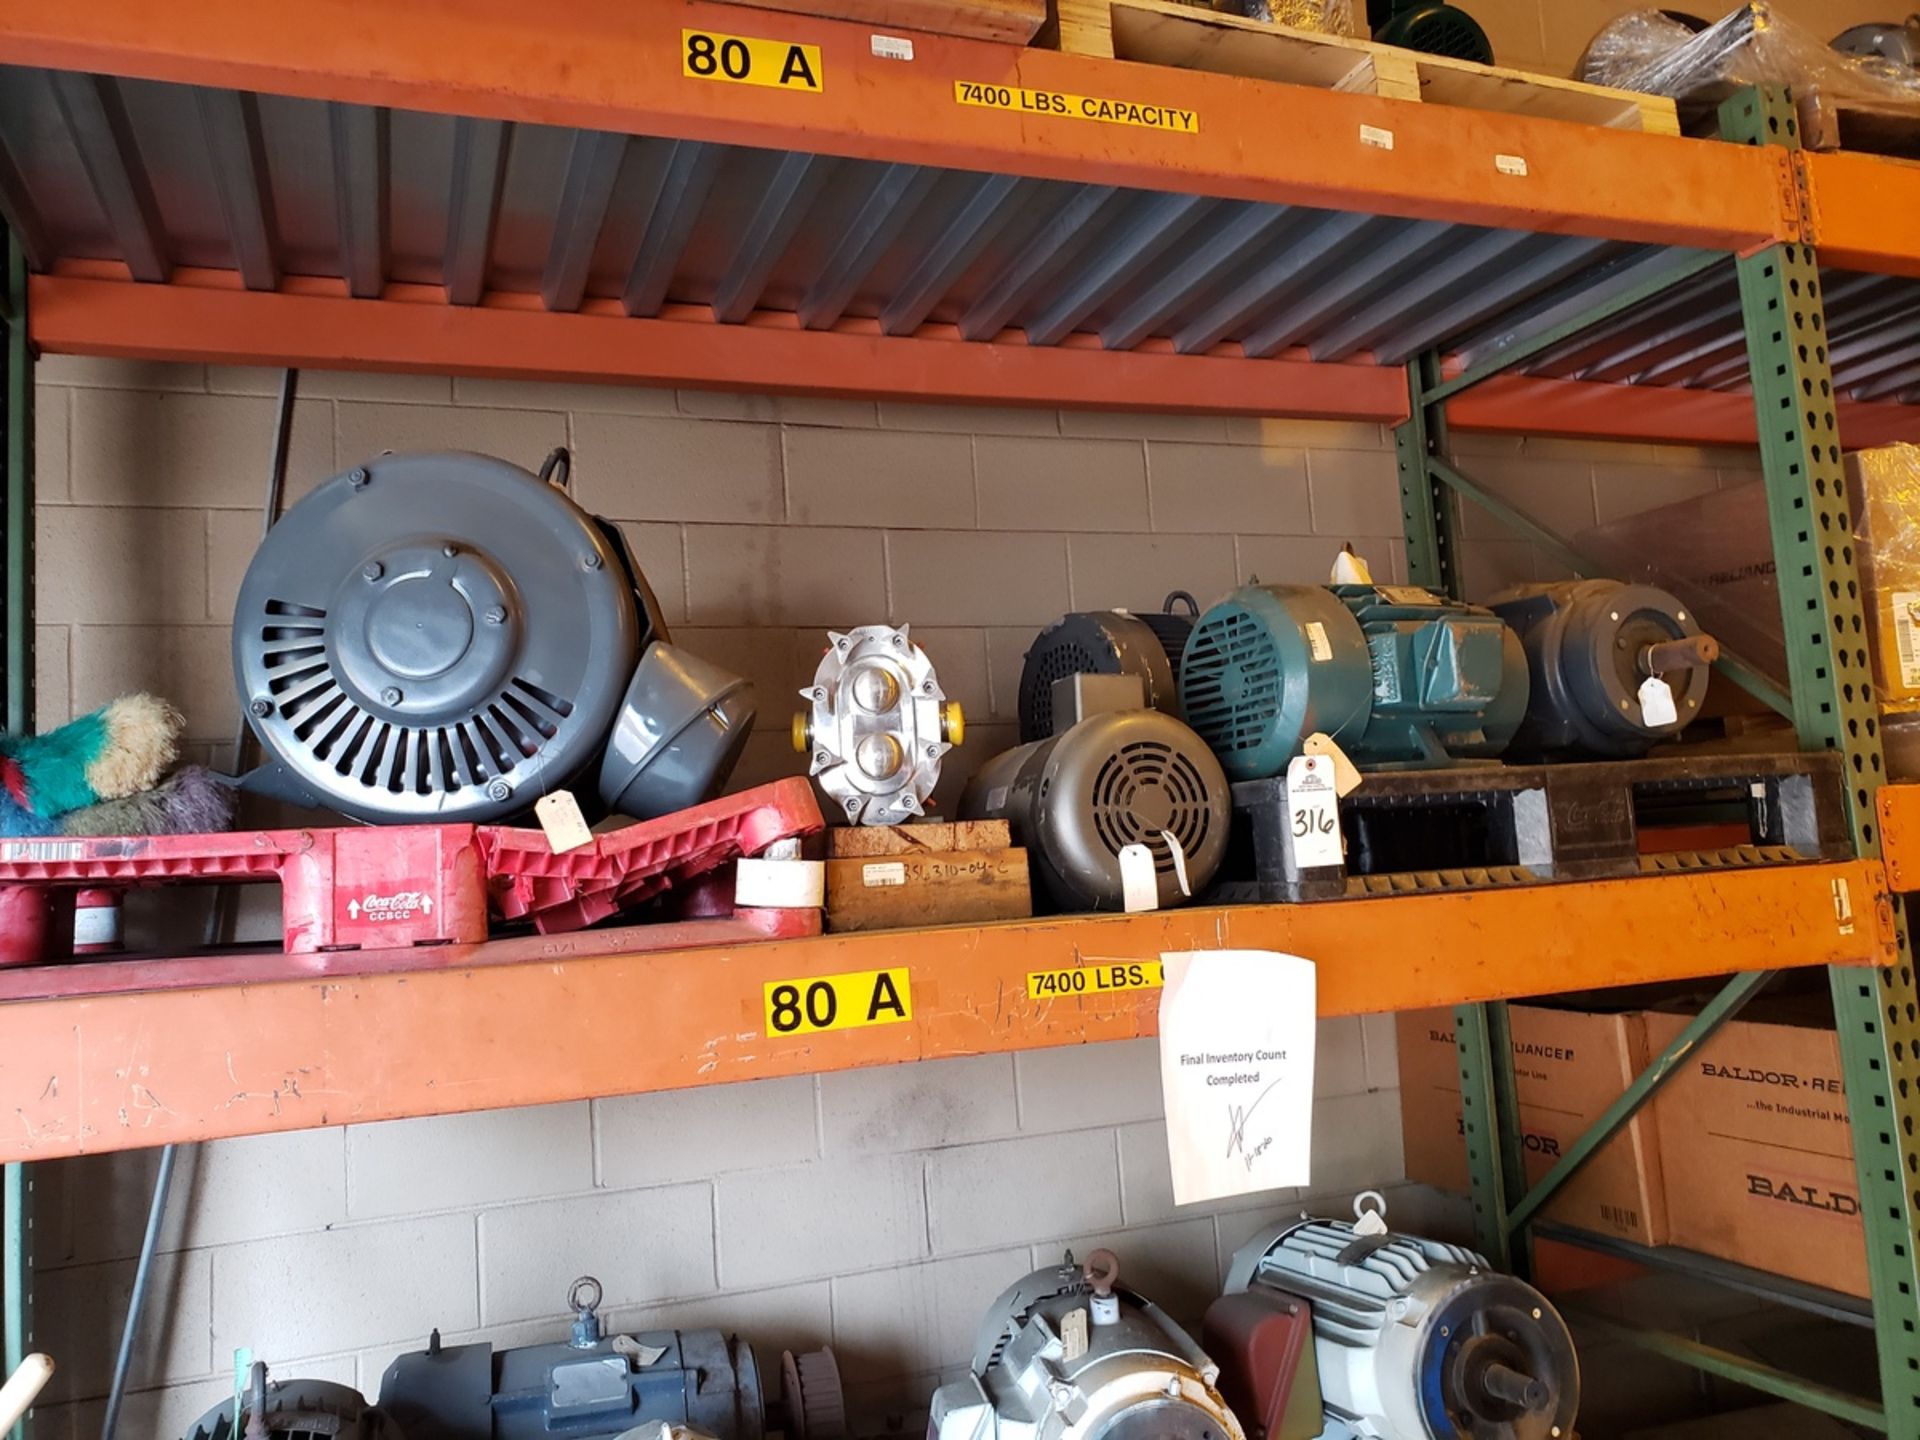 Contents of Pallet Rack Section, Spare Motors & Pump - Subj to Bulks | Reqd Rig Fee: $50